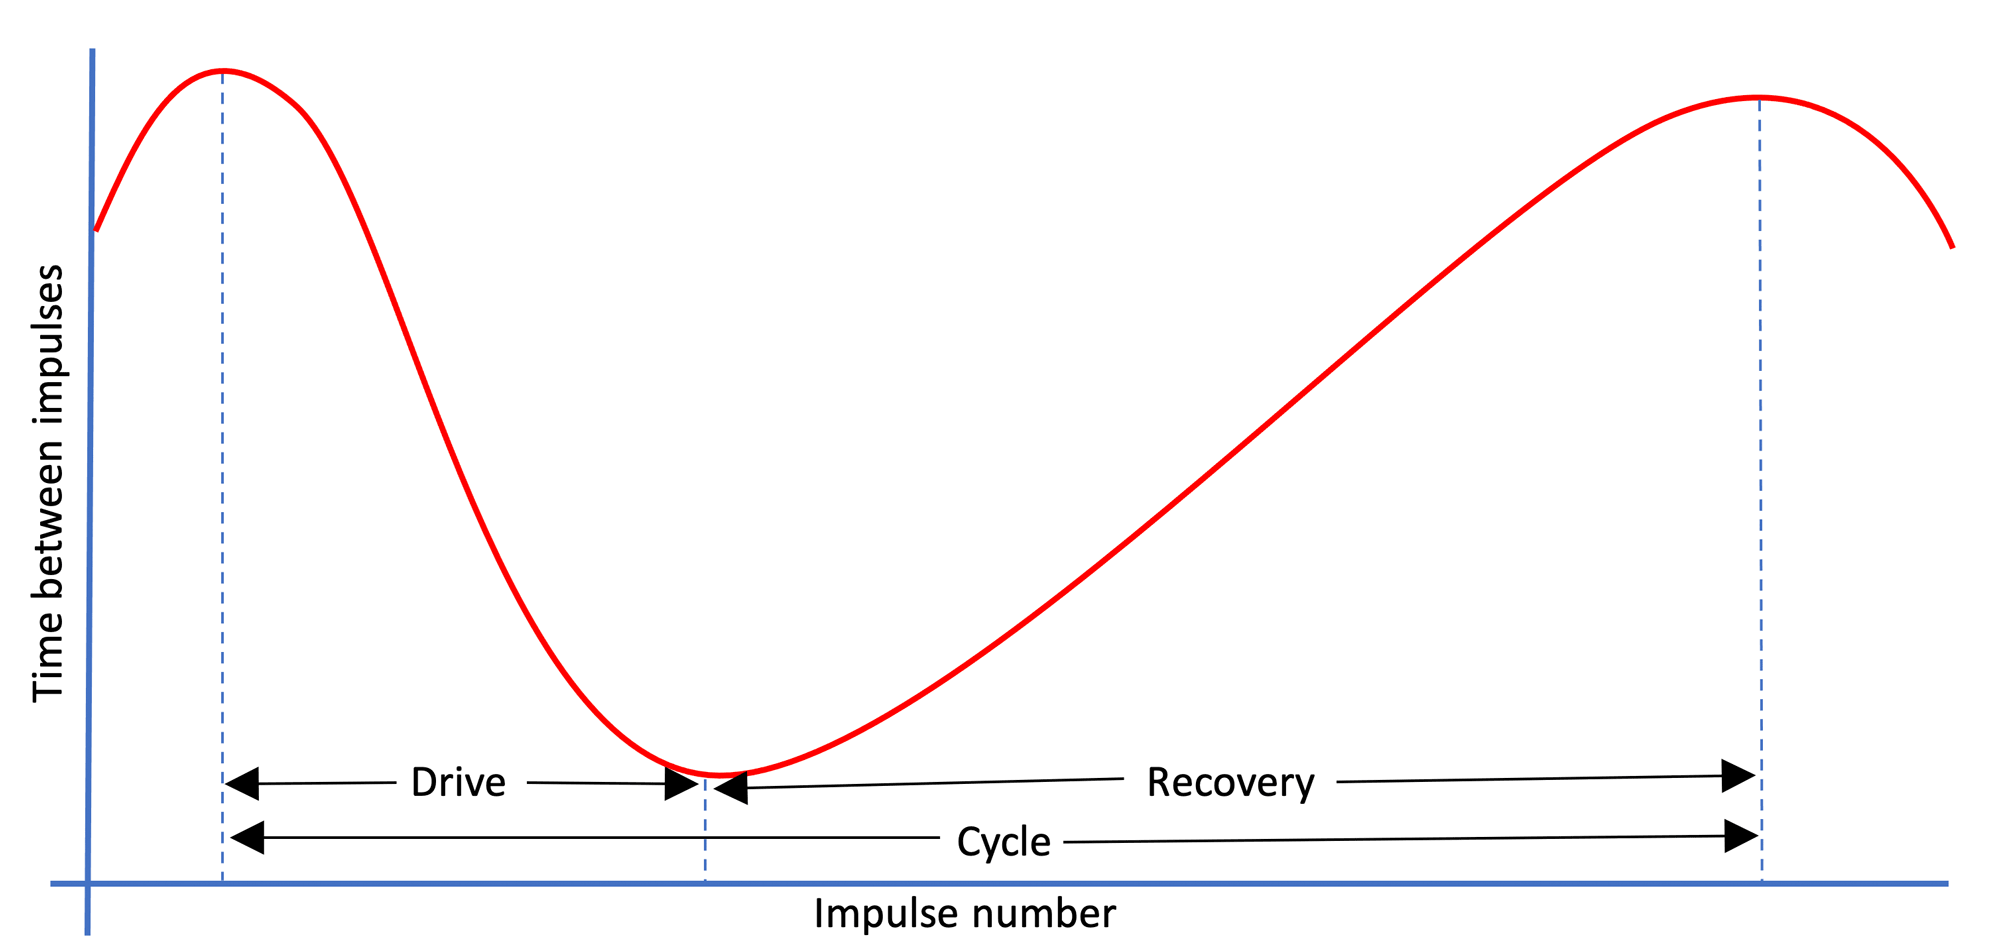 Impulses, impulse lengths and rowing cycle phases